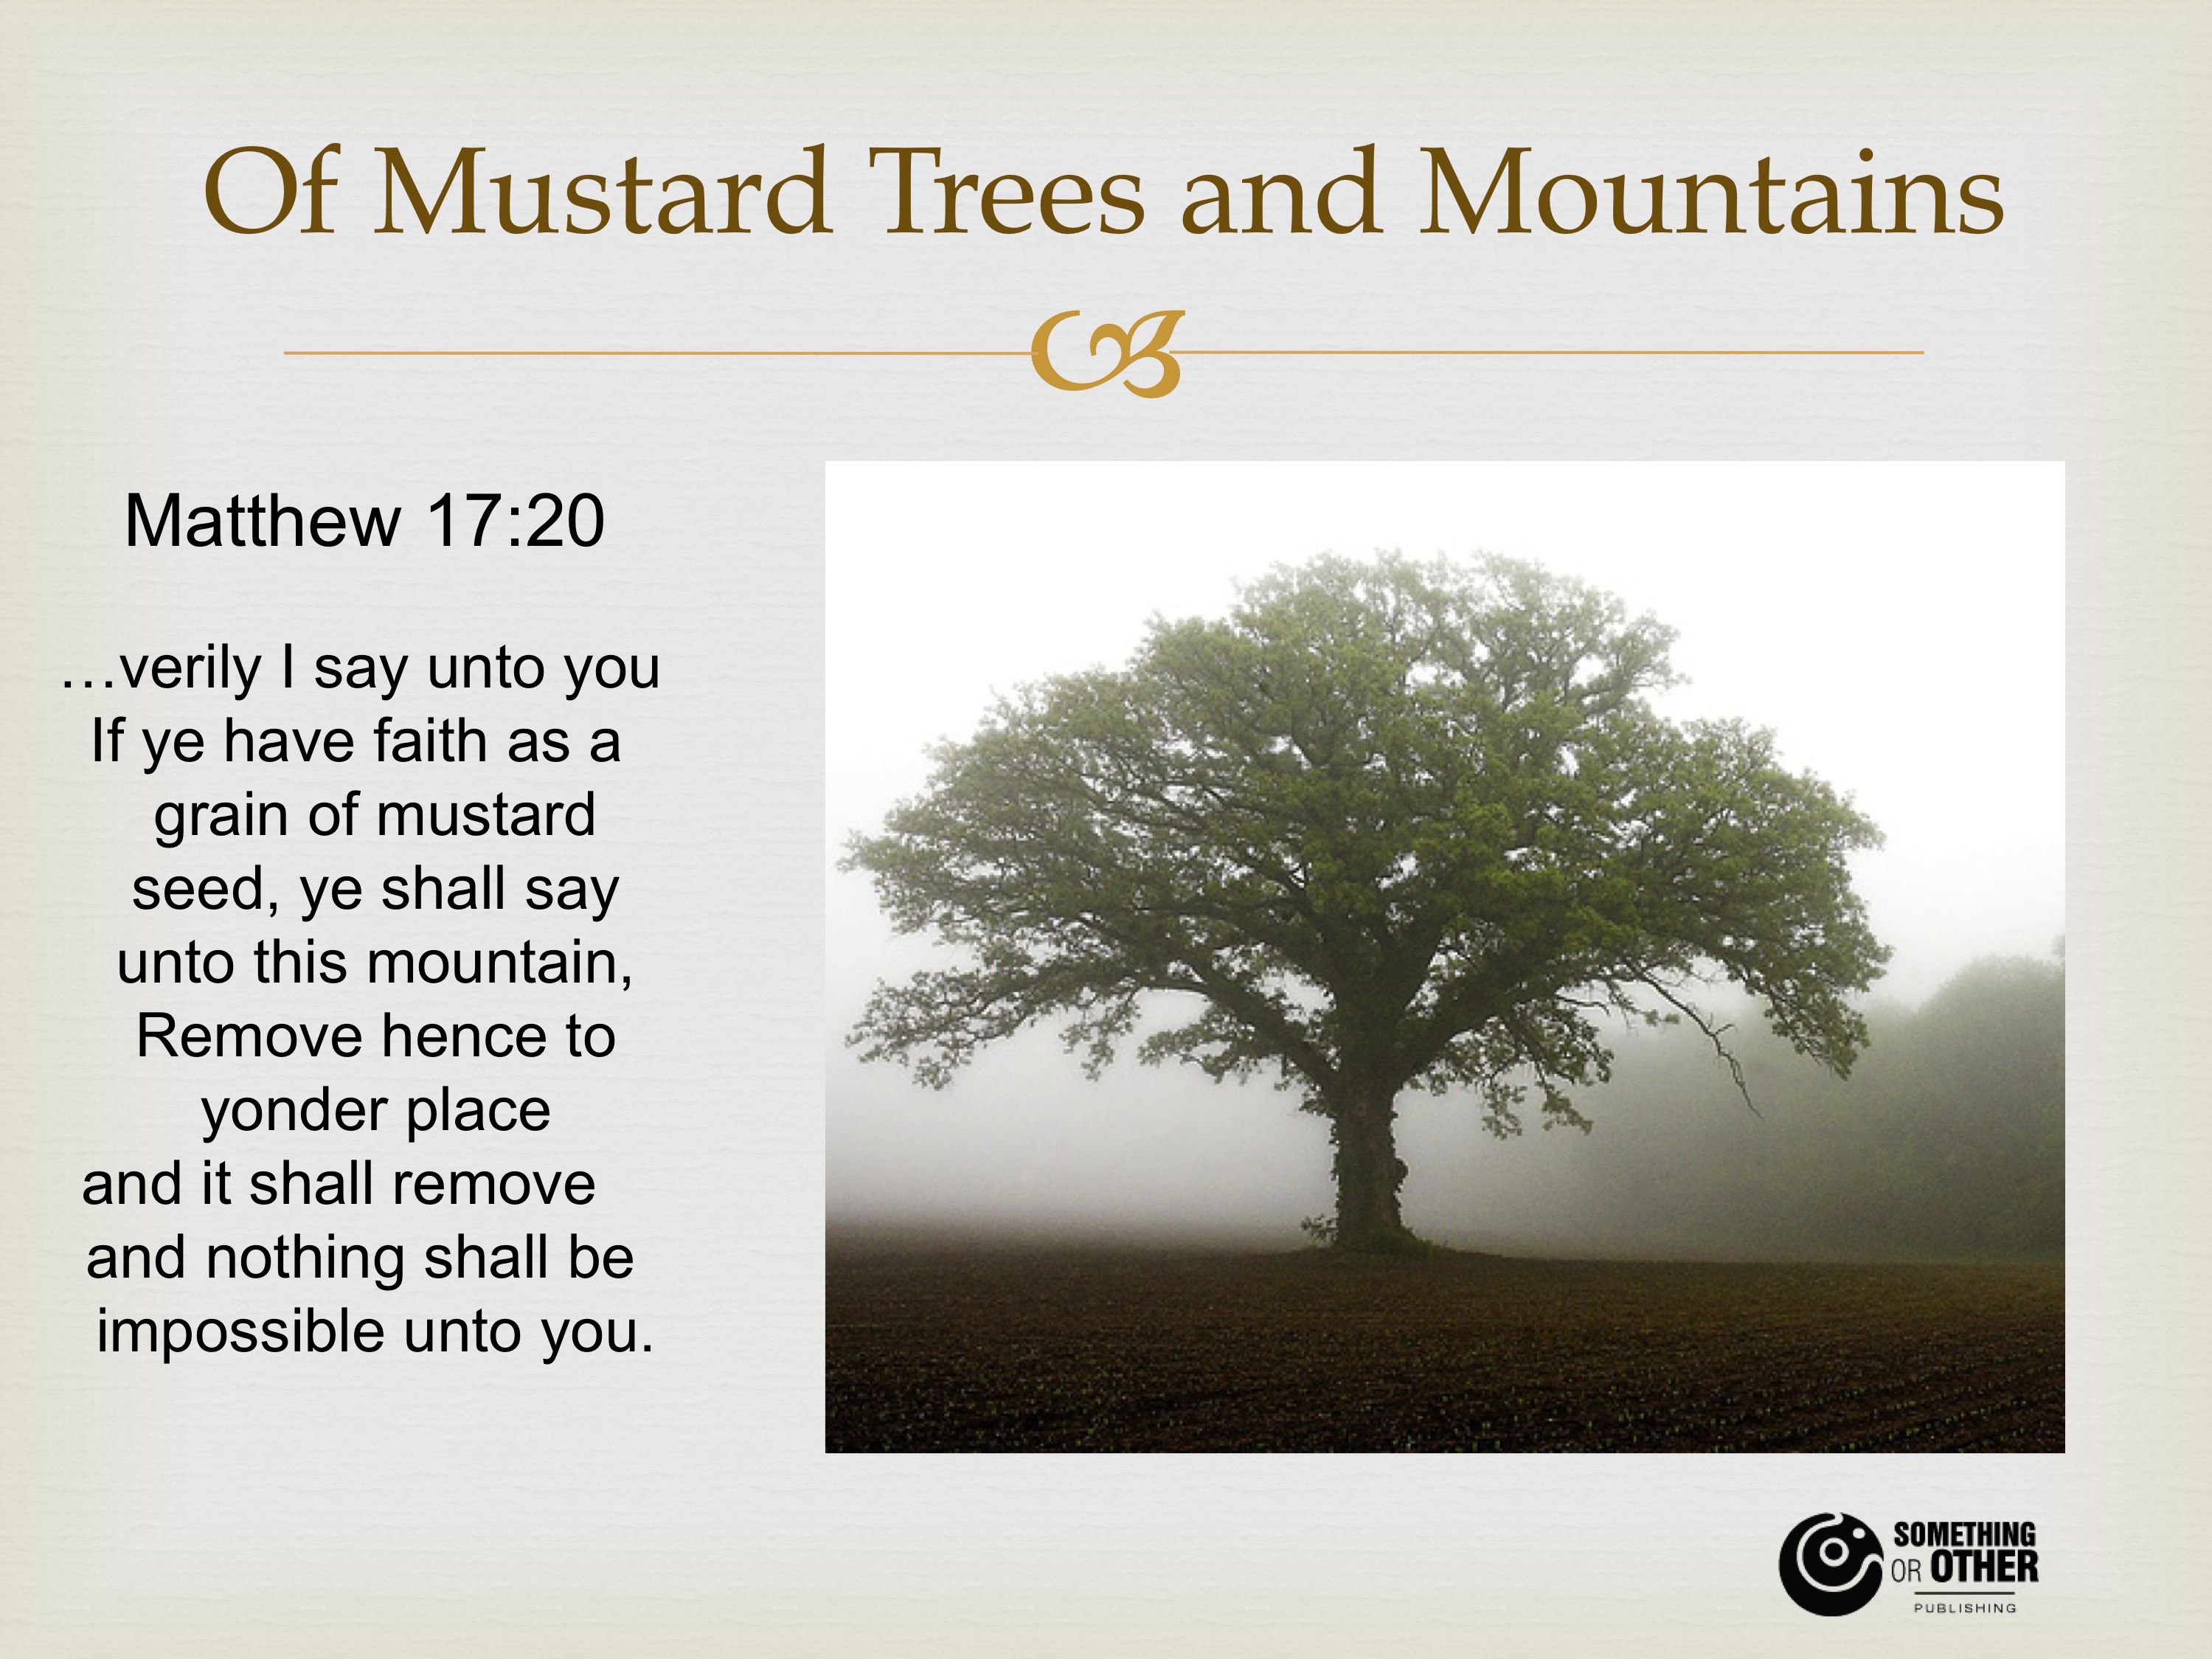 How tall does a mustard tree grow?